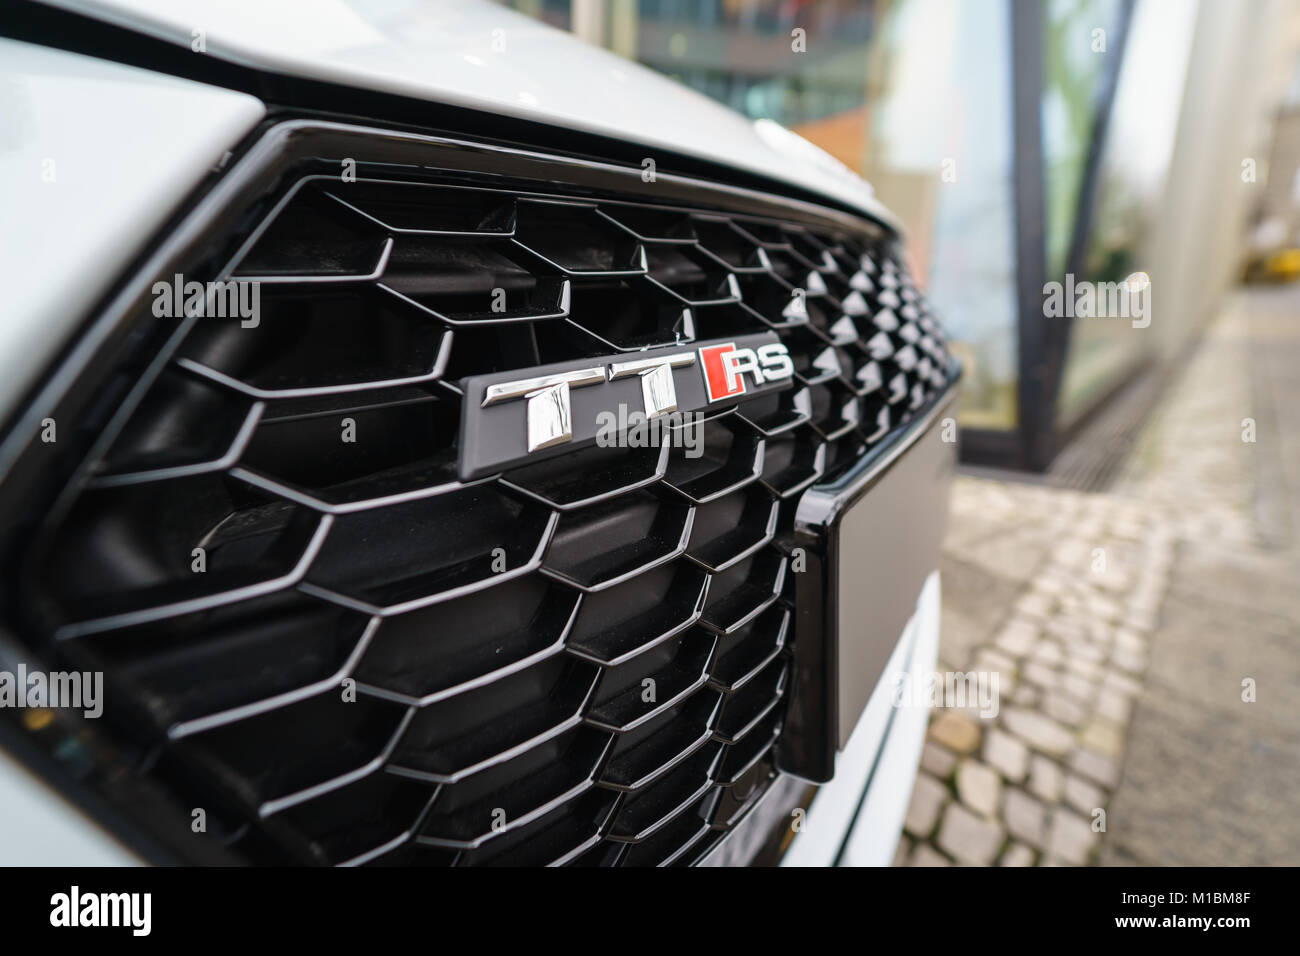 BERLIN - DECEMBER 21, 2017: Showroom. Emblem of the compact sports coupe Audi TT RS. Since 2016. Stock Photo